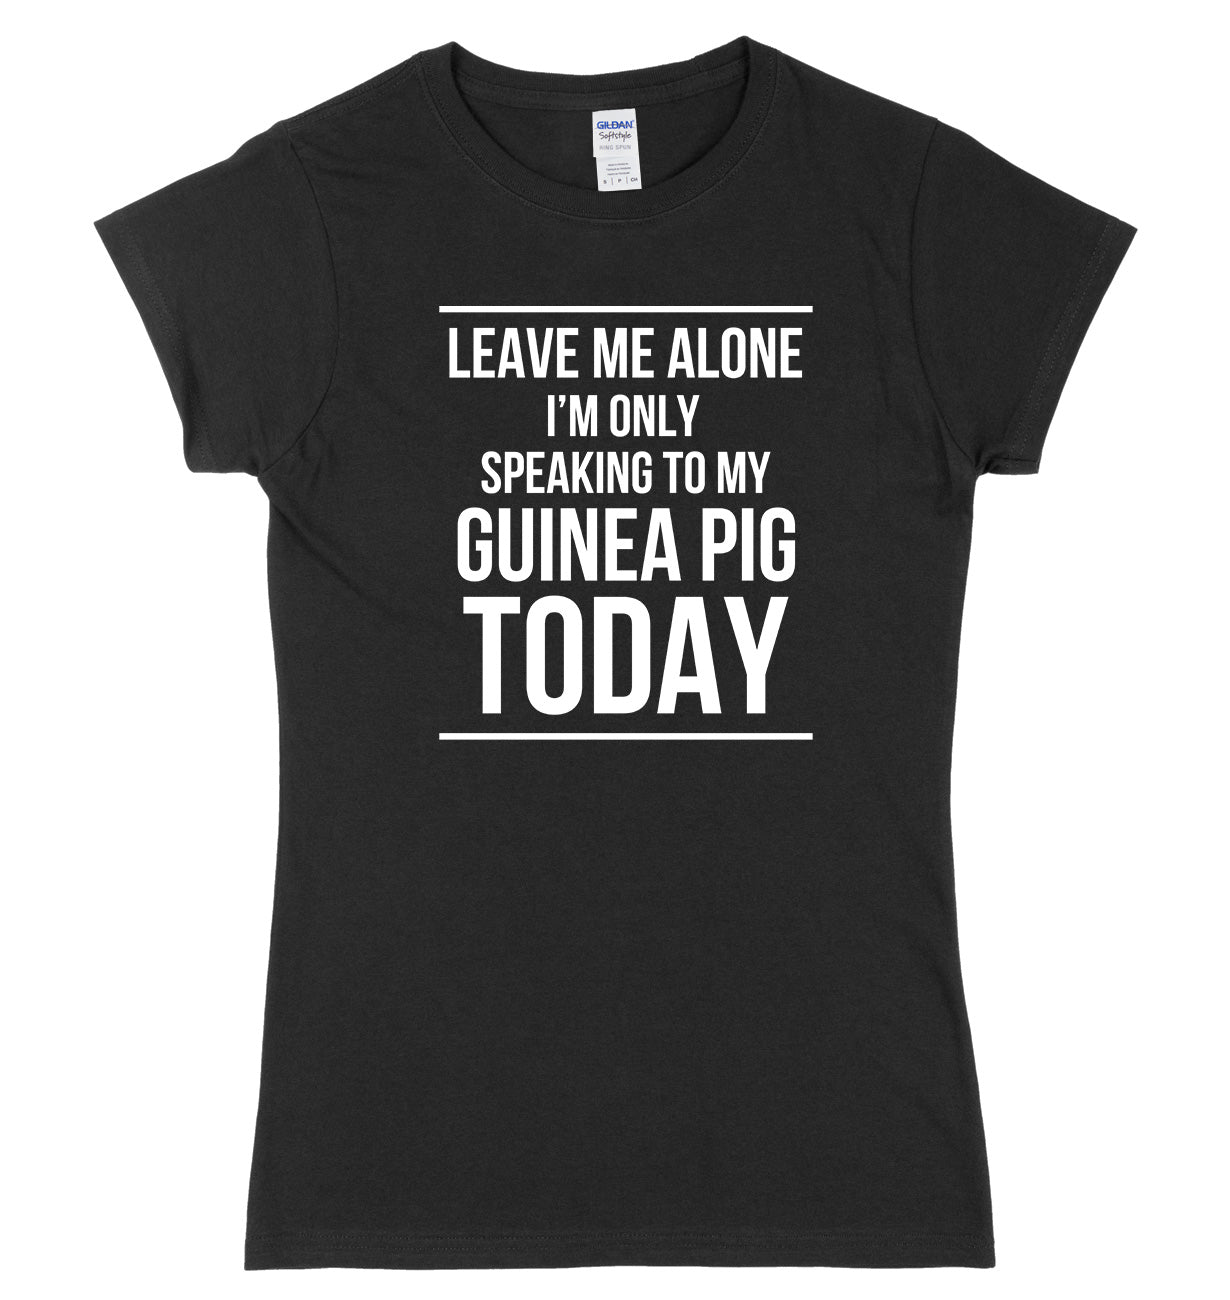 LEAVE ME ALONE I'M ONLY SPEAKING TO MY GUINEA PIG TODAY FUNNY WOMENS LADIES SLIM FIT  T-SHIRT